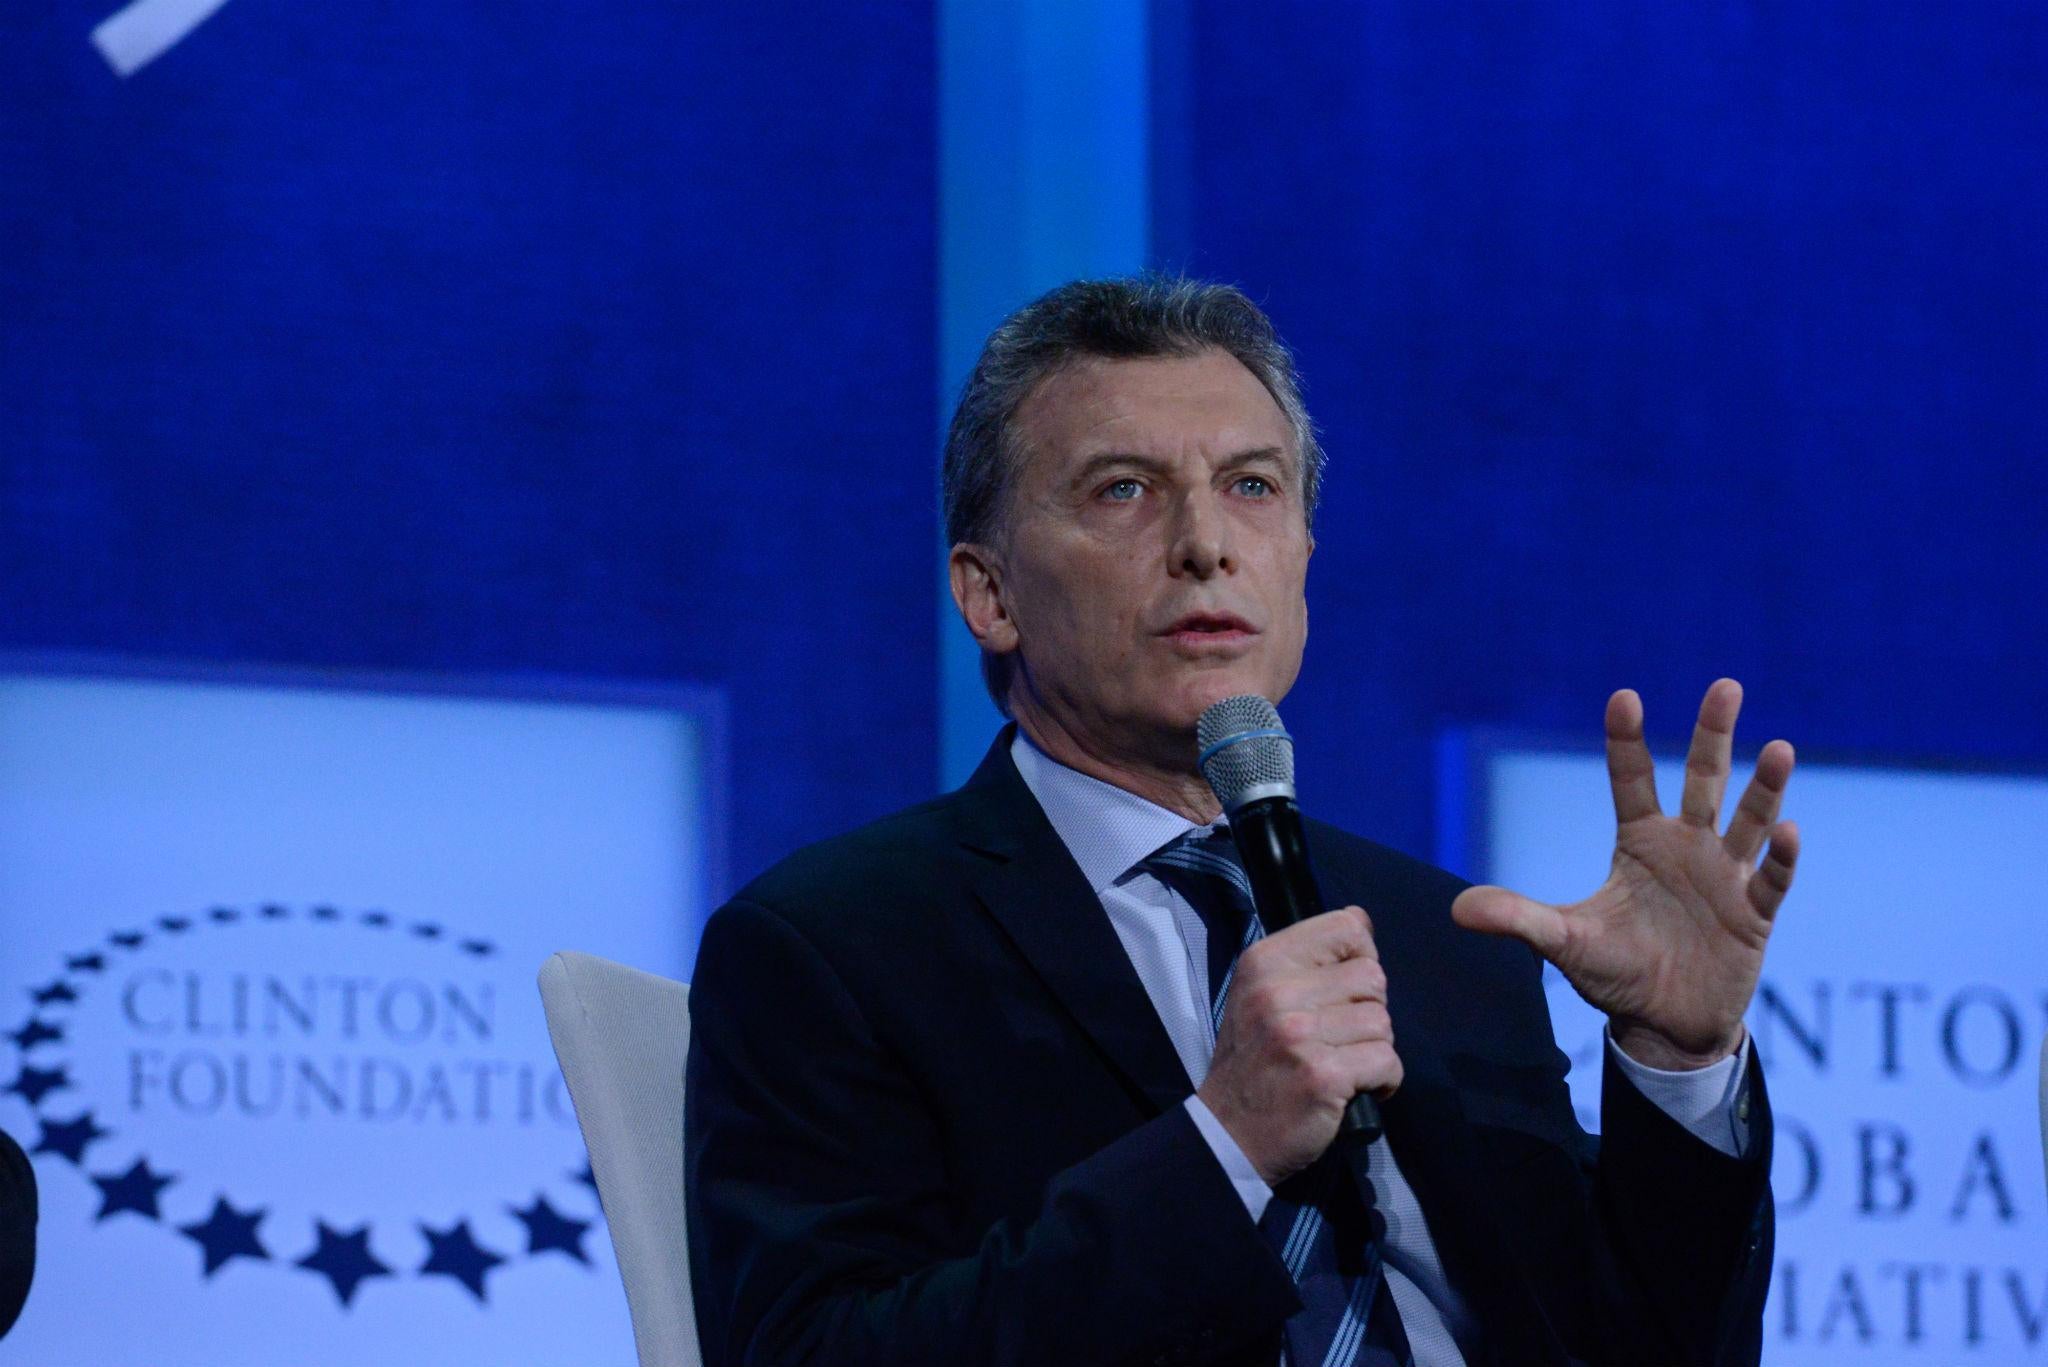 Argentina's President Mauricio Macri speaking at the annual meeting of the Clinton Global Initiative in New York in September